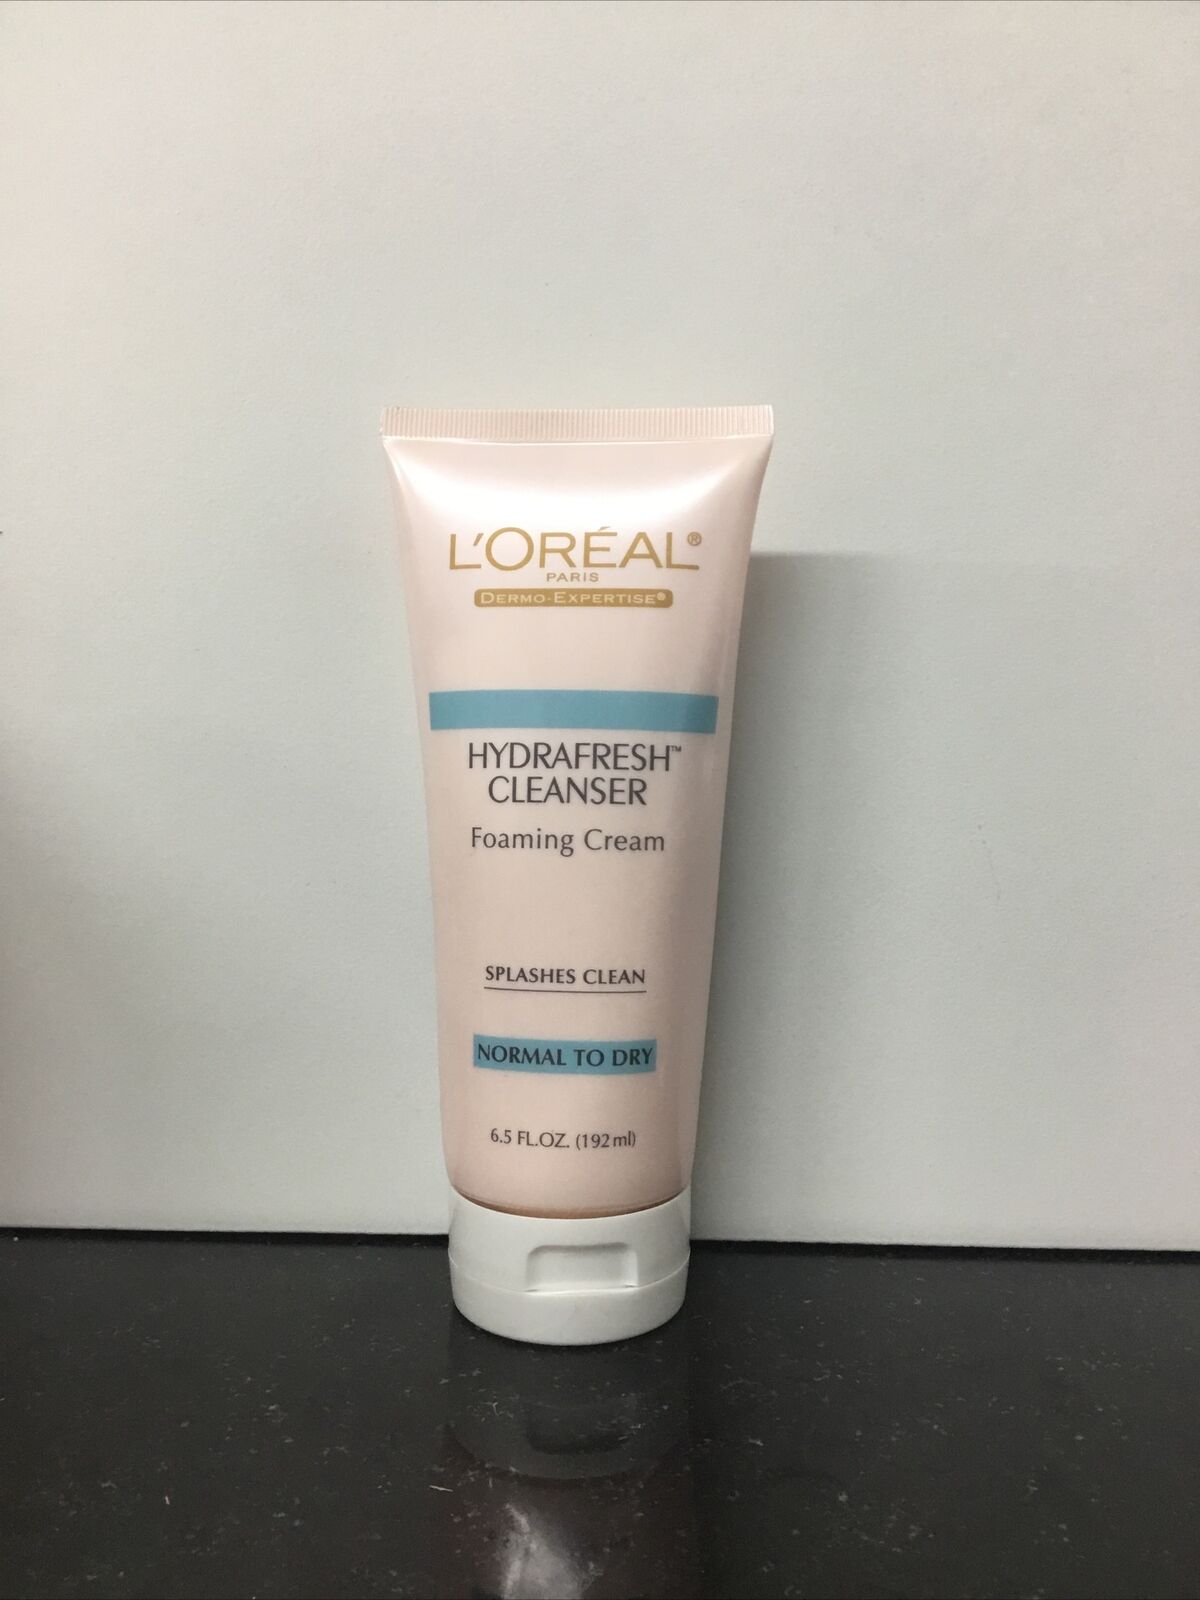 L’Oreal Paris Hydrafresh Cleanser Foaming Cream Splashes Clean Normal to Dry 6.5